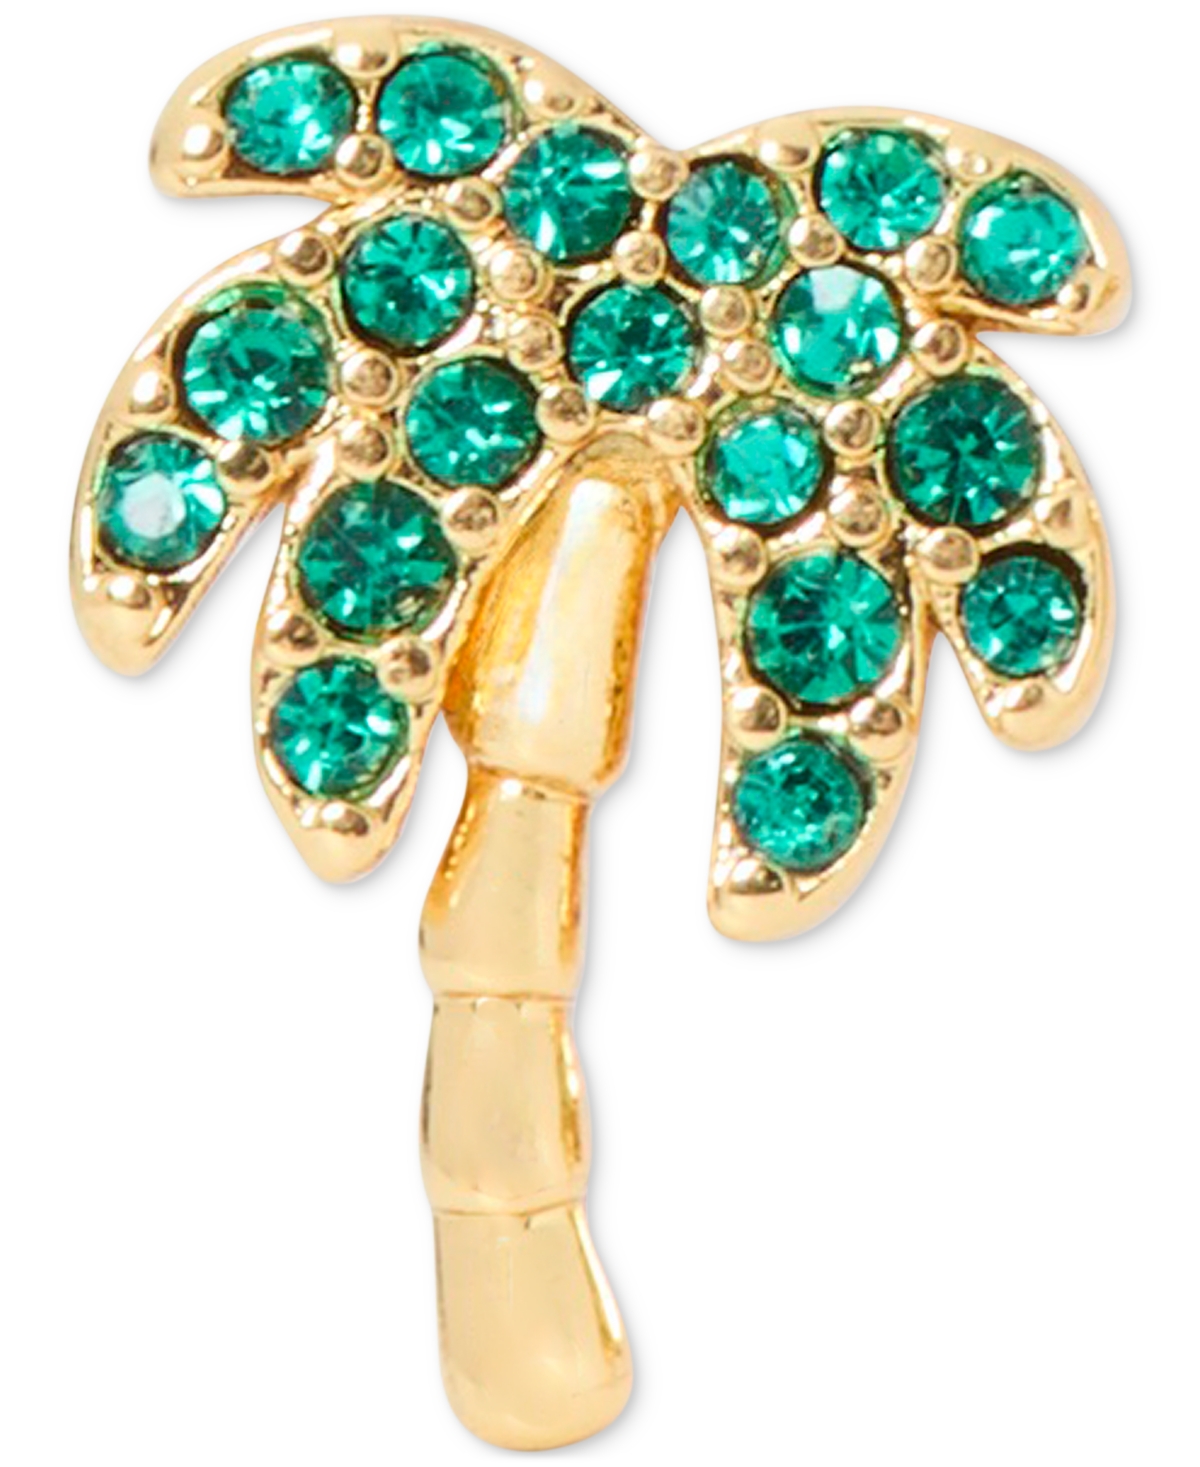 Gold-Tone Color Pave Palm Tree Stud Earrings - Green. Mul